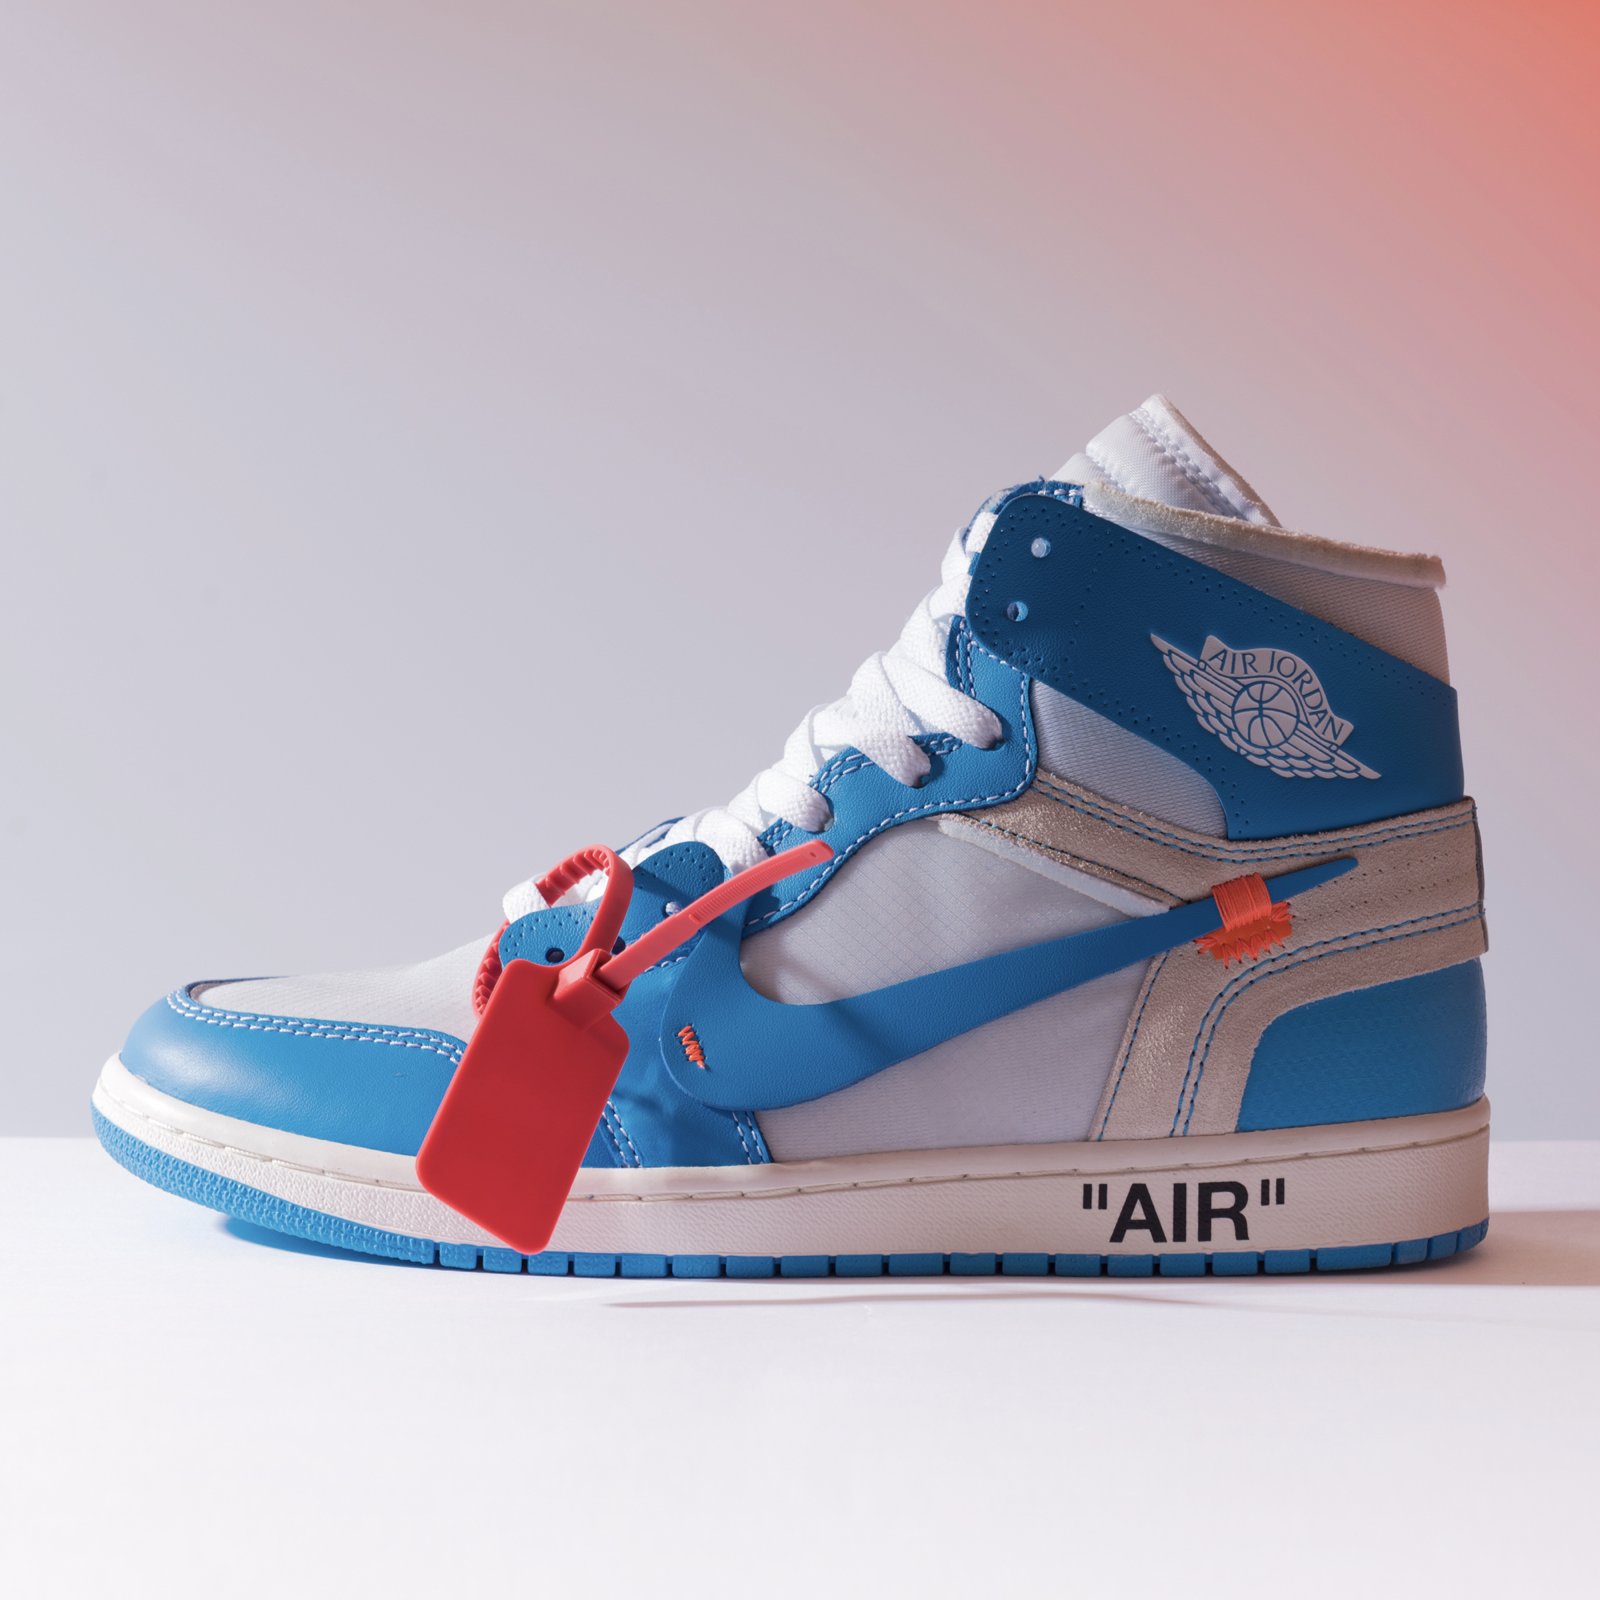 sivasdescalzo on Twitter: "The return an icon – the long-awaited Air Jordan 1 Retro High Off White UNC is back! Head link below to download the app, you have